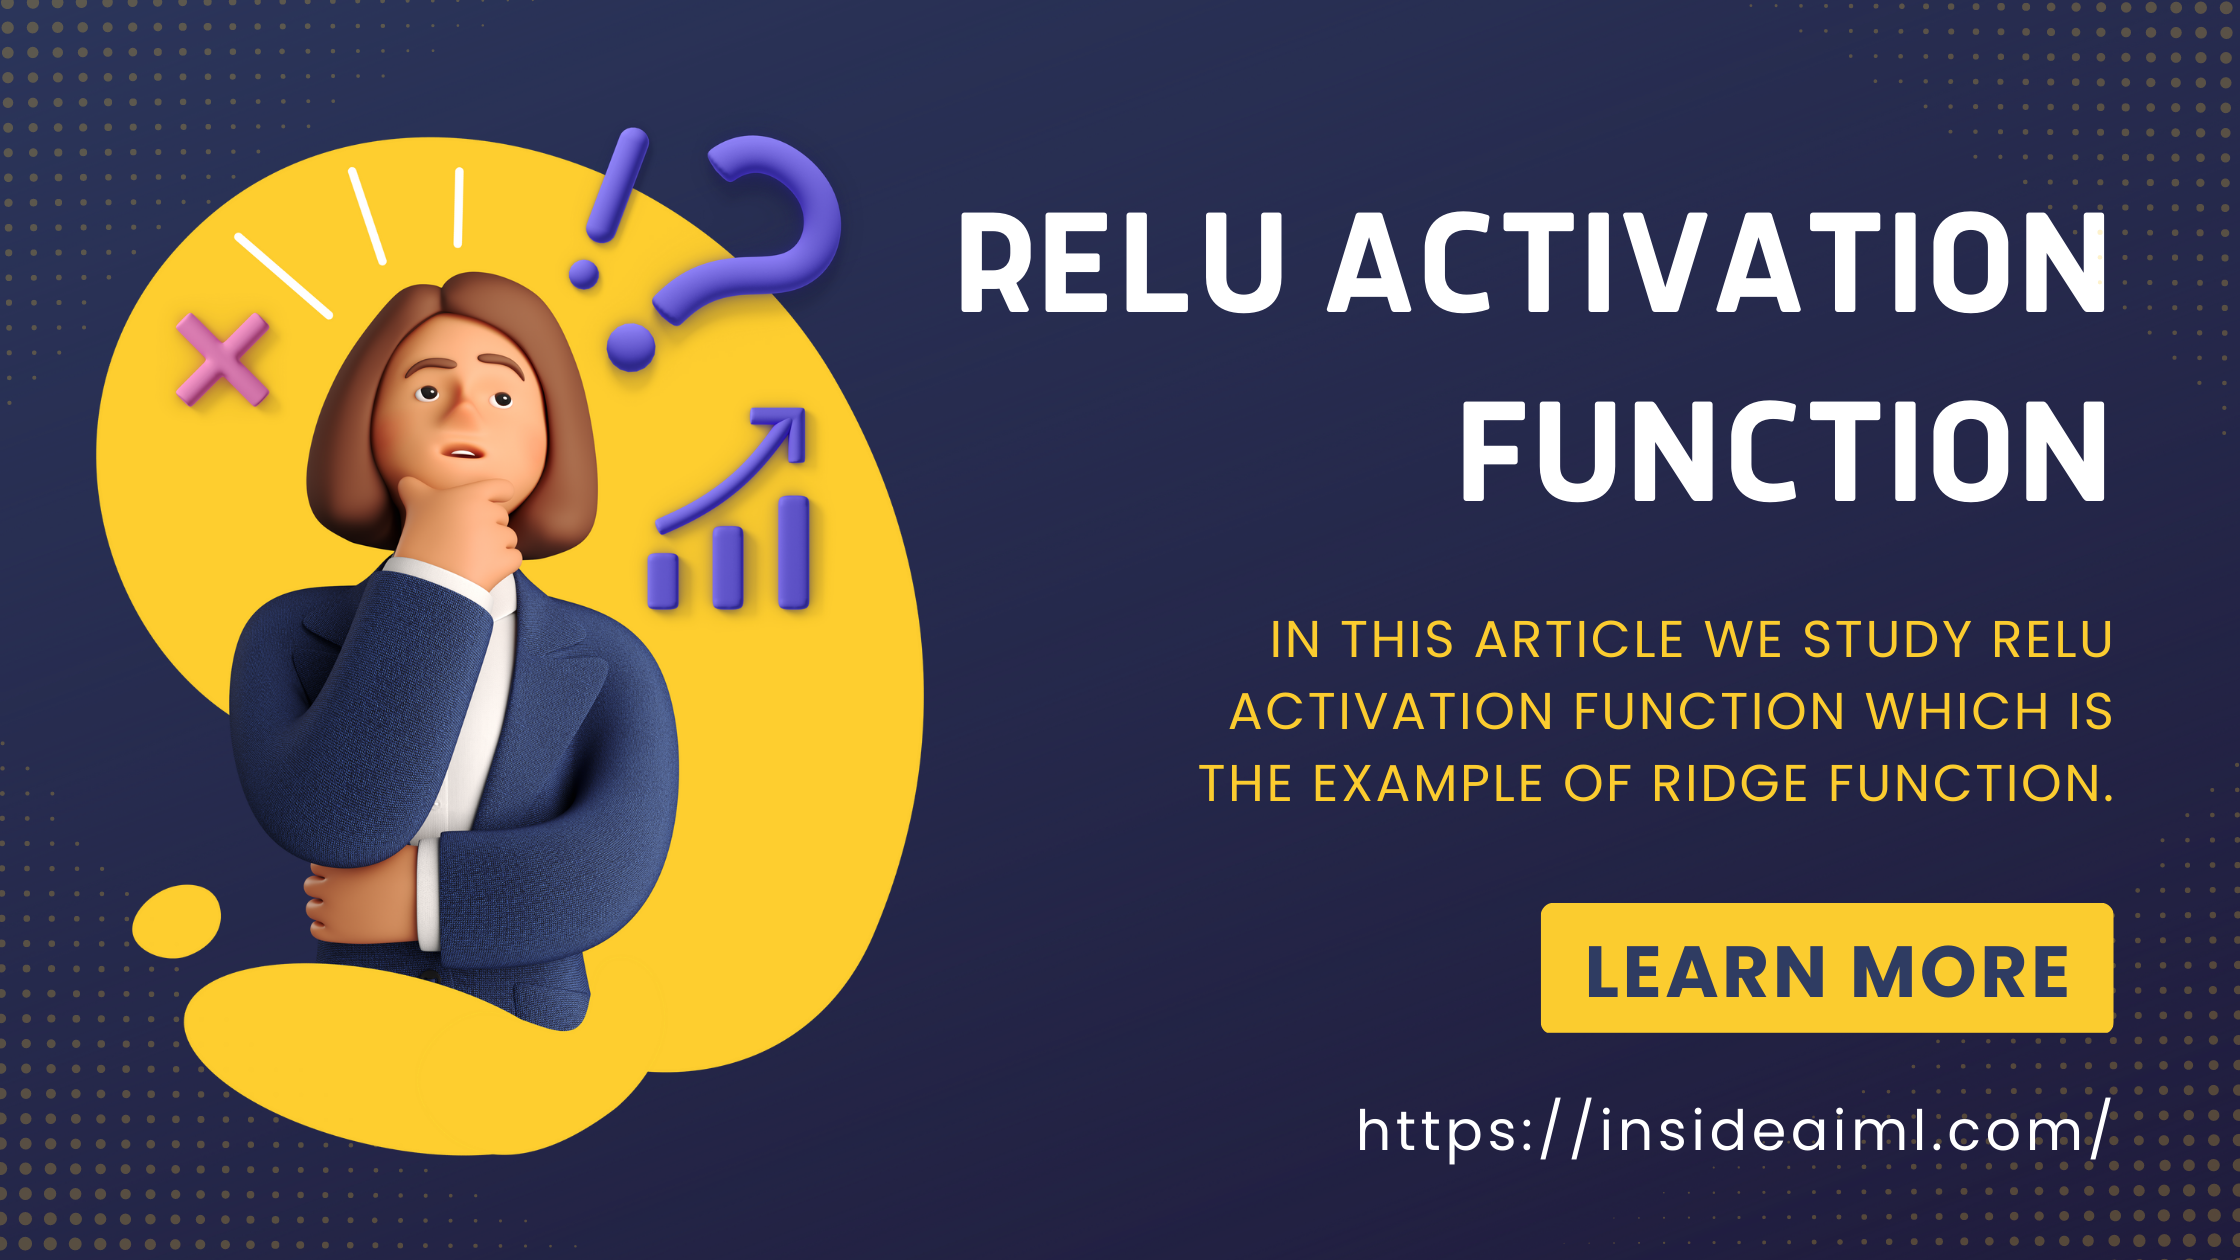 What exactly is the ReLU activation function and how does it work?